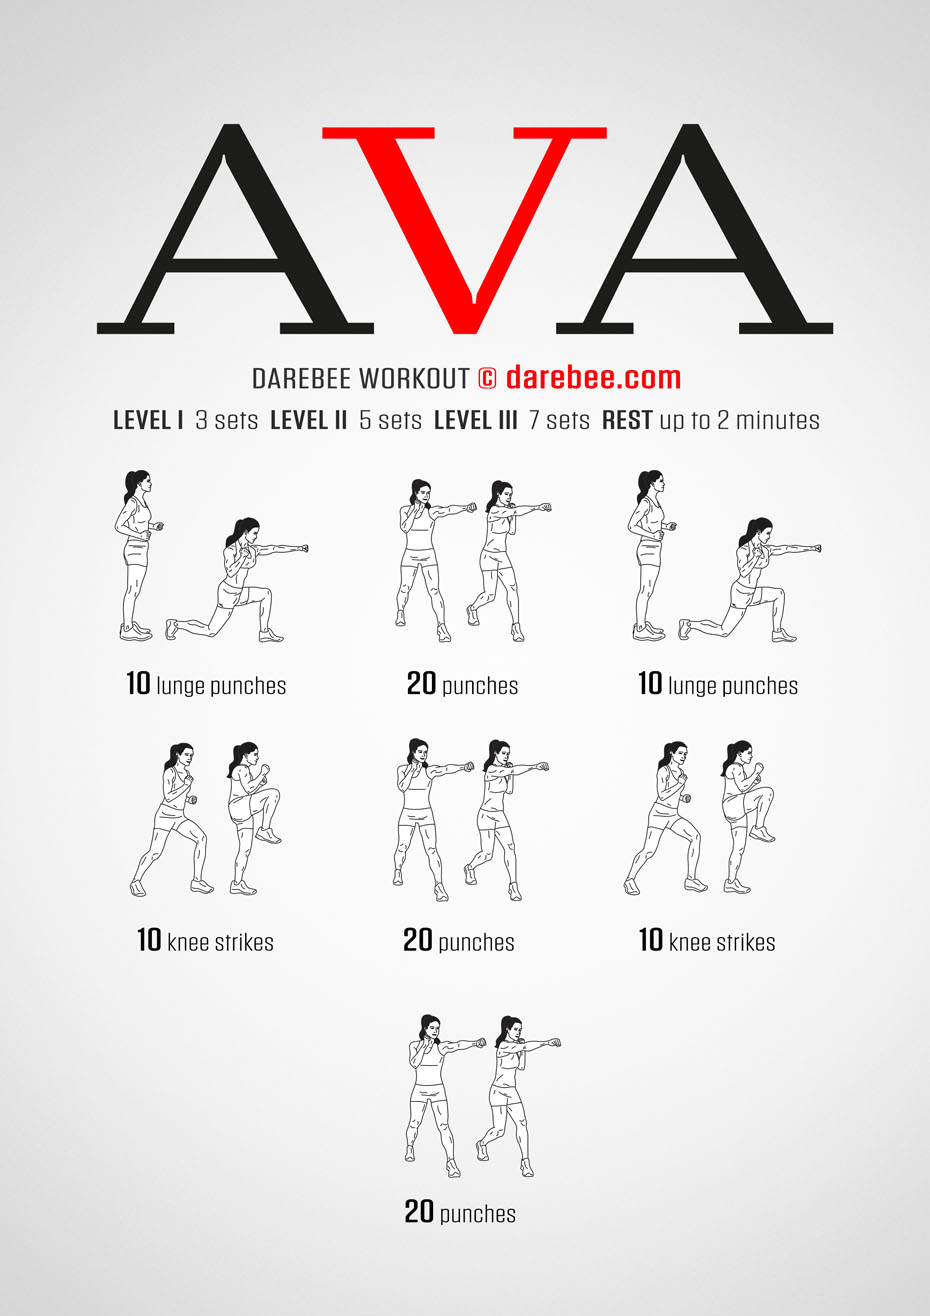 Ava is a Darebee home-fitness workout that has it all. Speed, strength, coordination and balance. It helps you achieve greater control over your body and mind